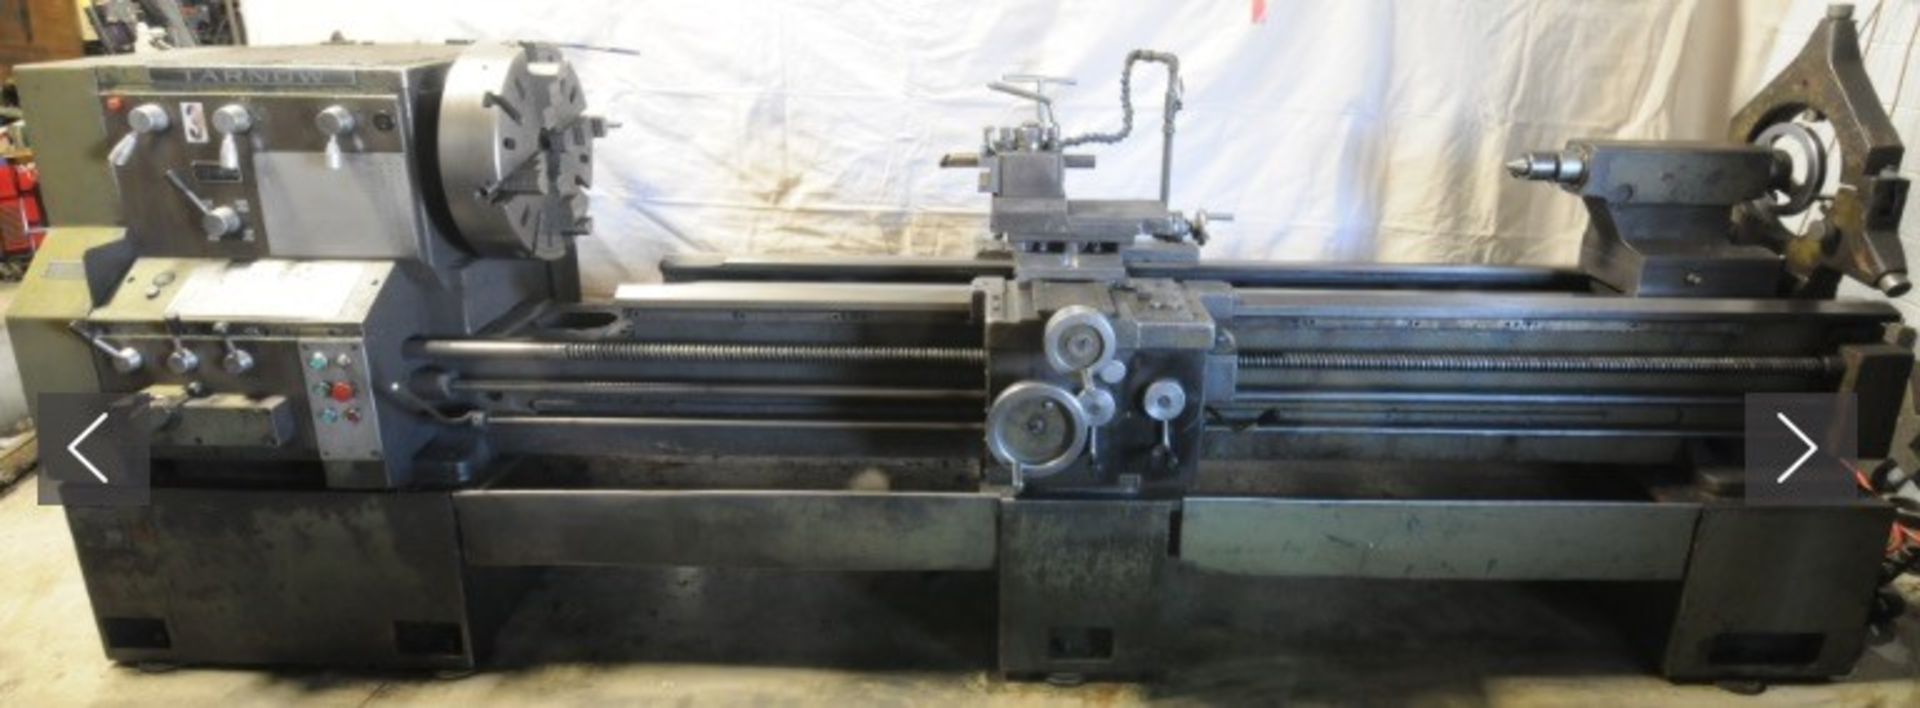 TARNOW TUJ50 LATHE, 100`` BED, 3.5`` SPINDLE BORE, 1600 RPM